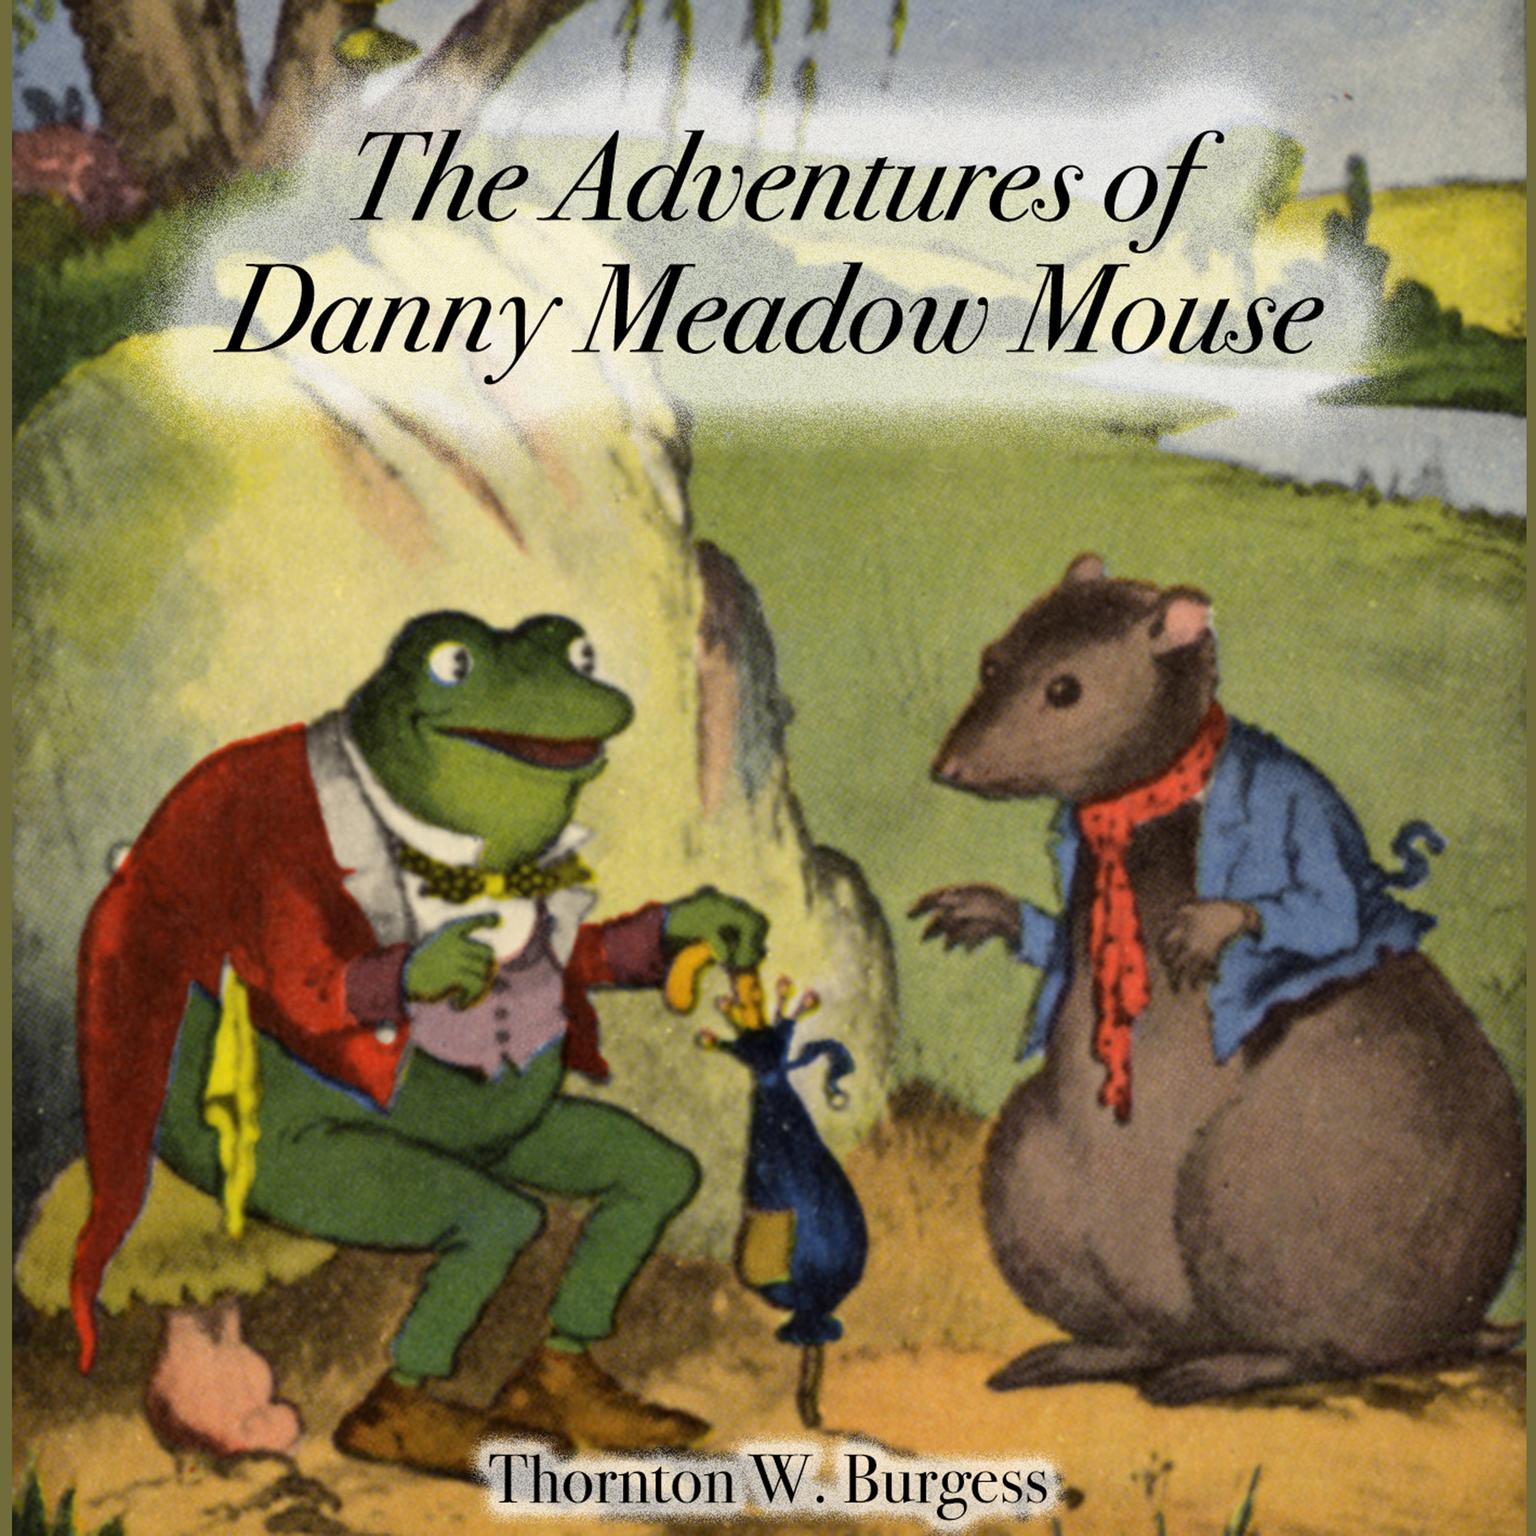 The Adventures of Danny Meadow Mouse Audiobook, by Thornton W. Burgess